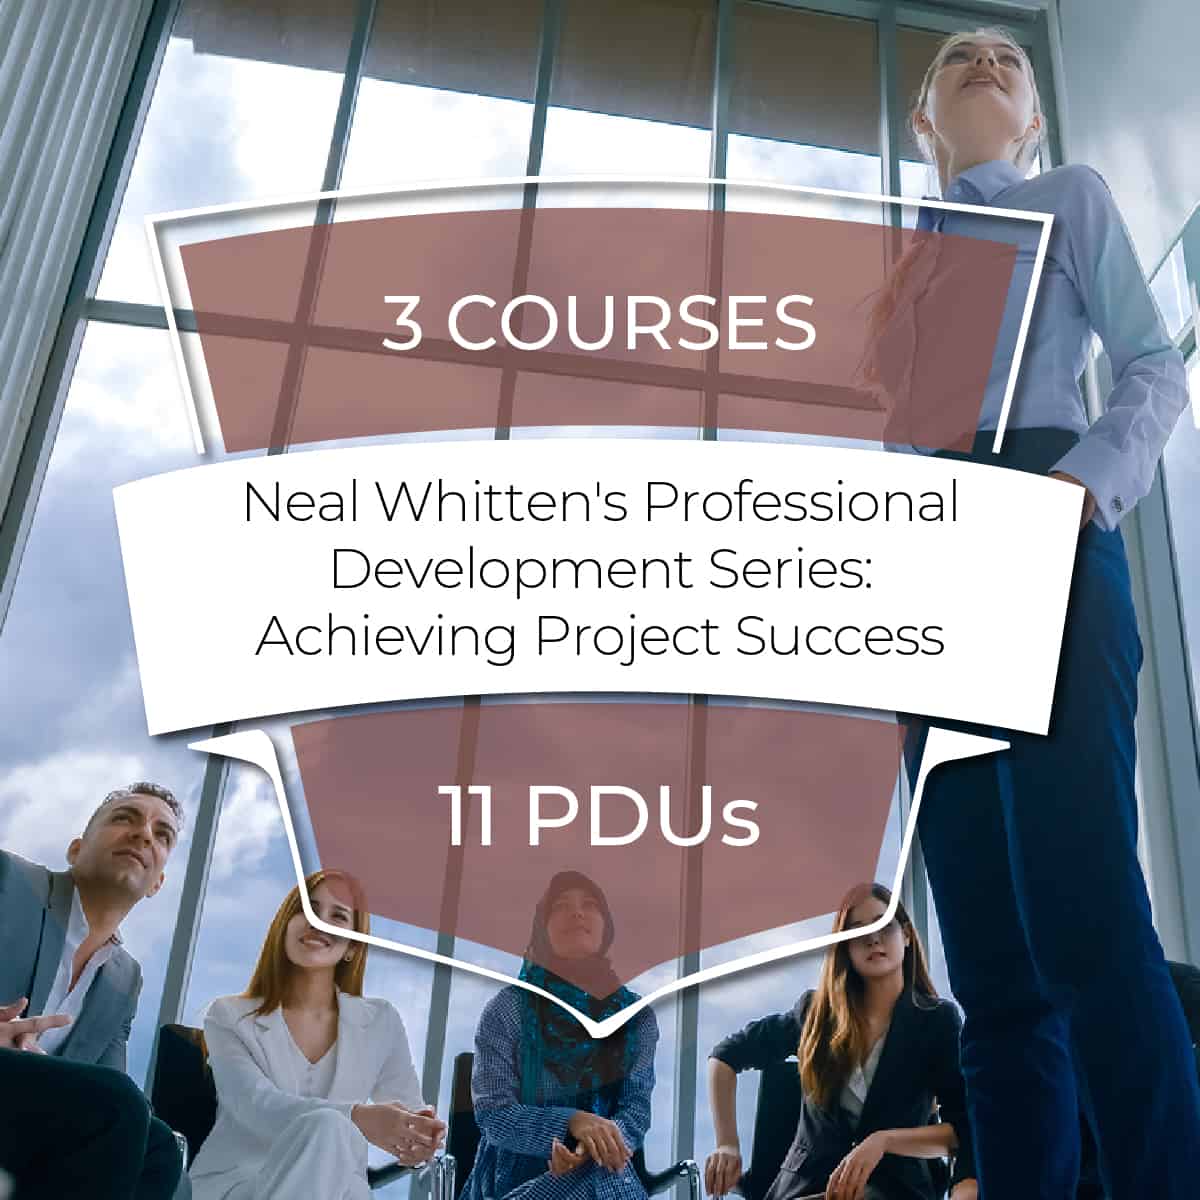 <p>Neal Whitten’s Professional Development Series: Achieving Project Success – Save 15%</p>
